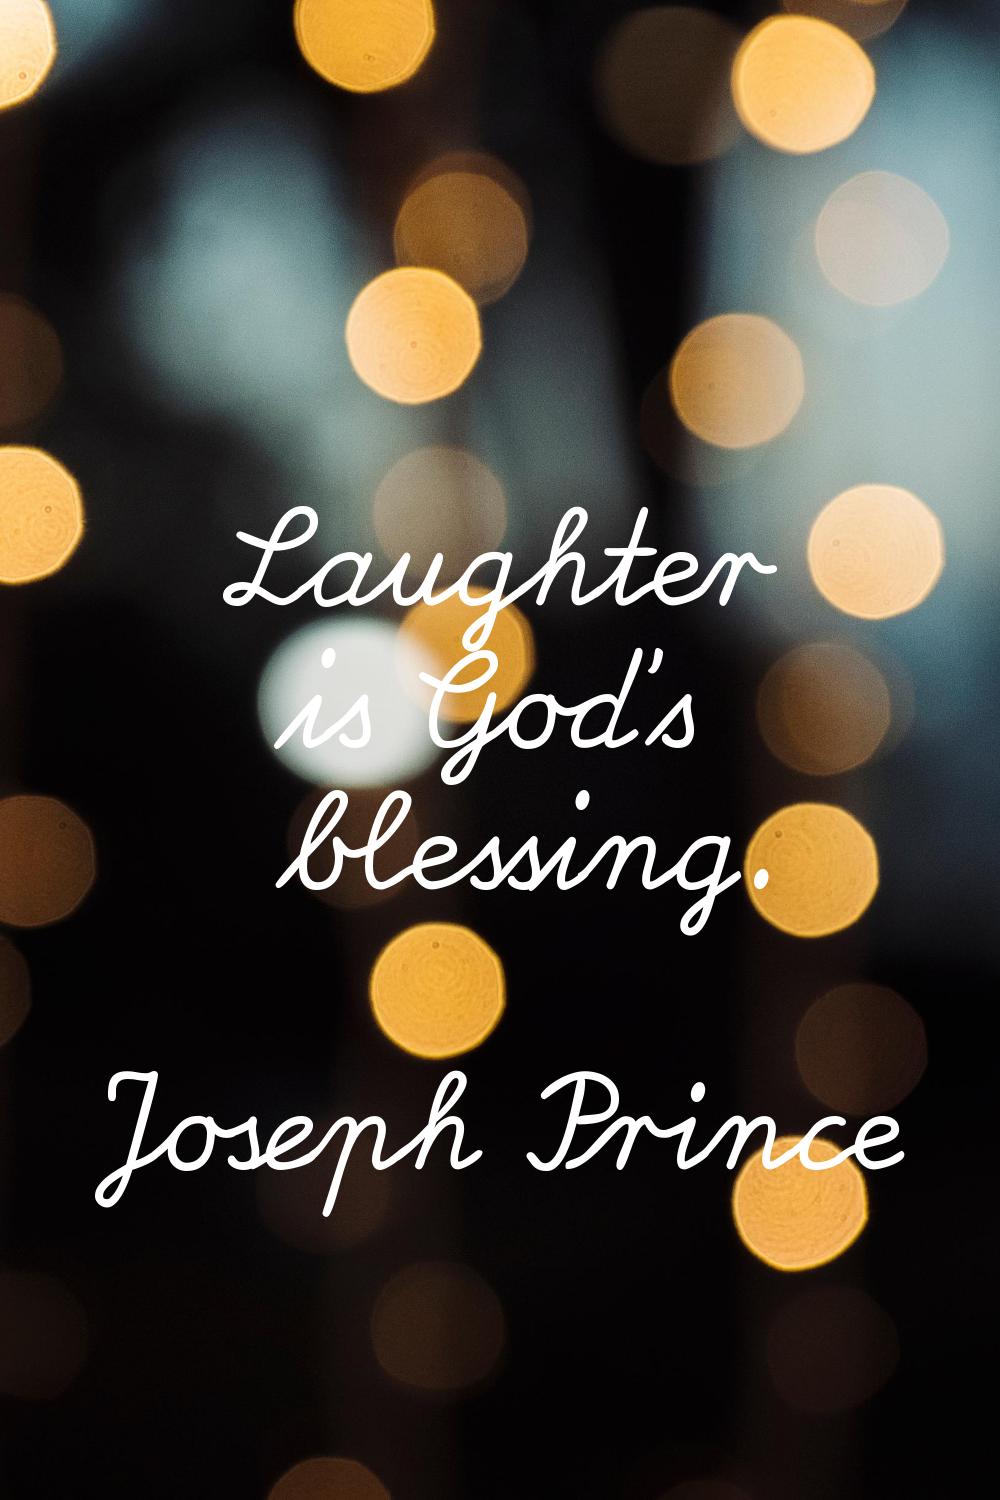 Laughter is God's blessing.